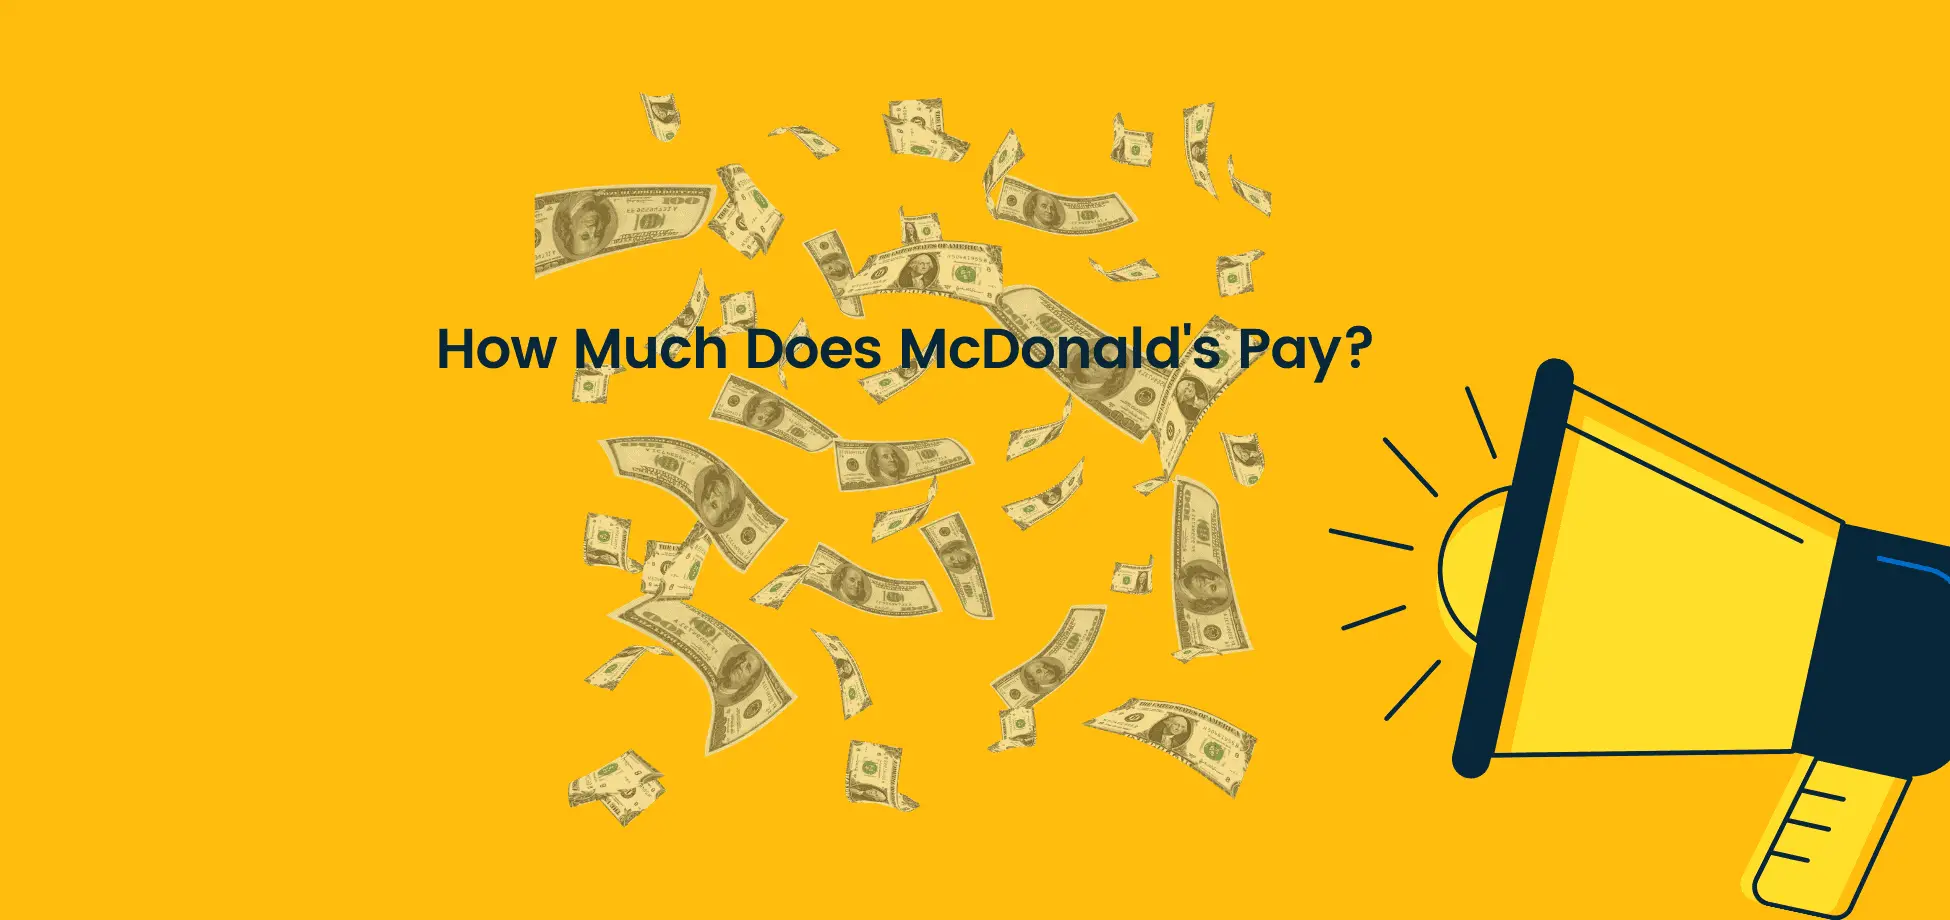 What is the starting pay at McDonald's? Let's take a close look at the present pay and see what's in store for the future